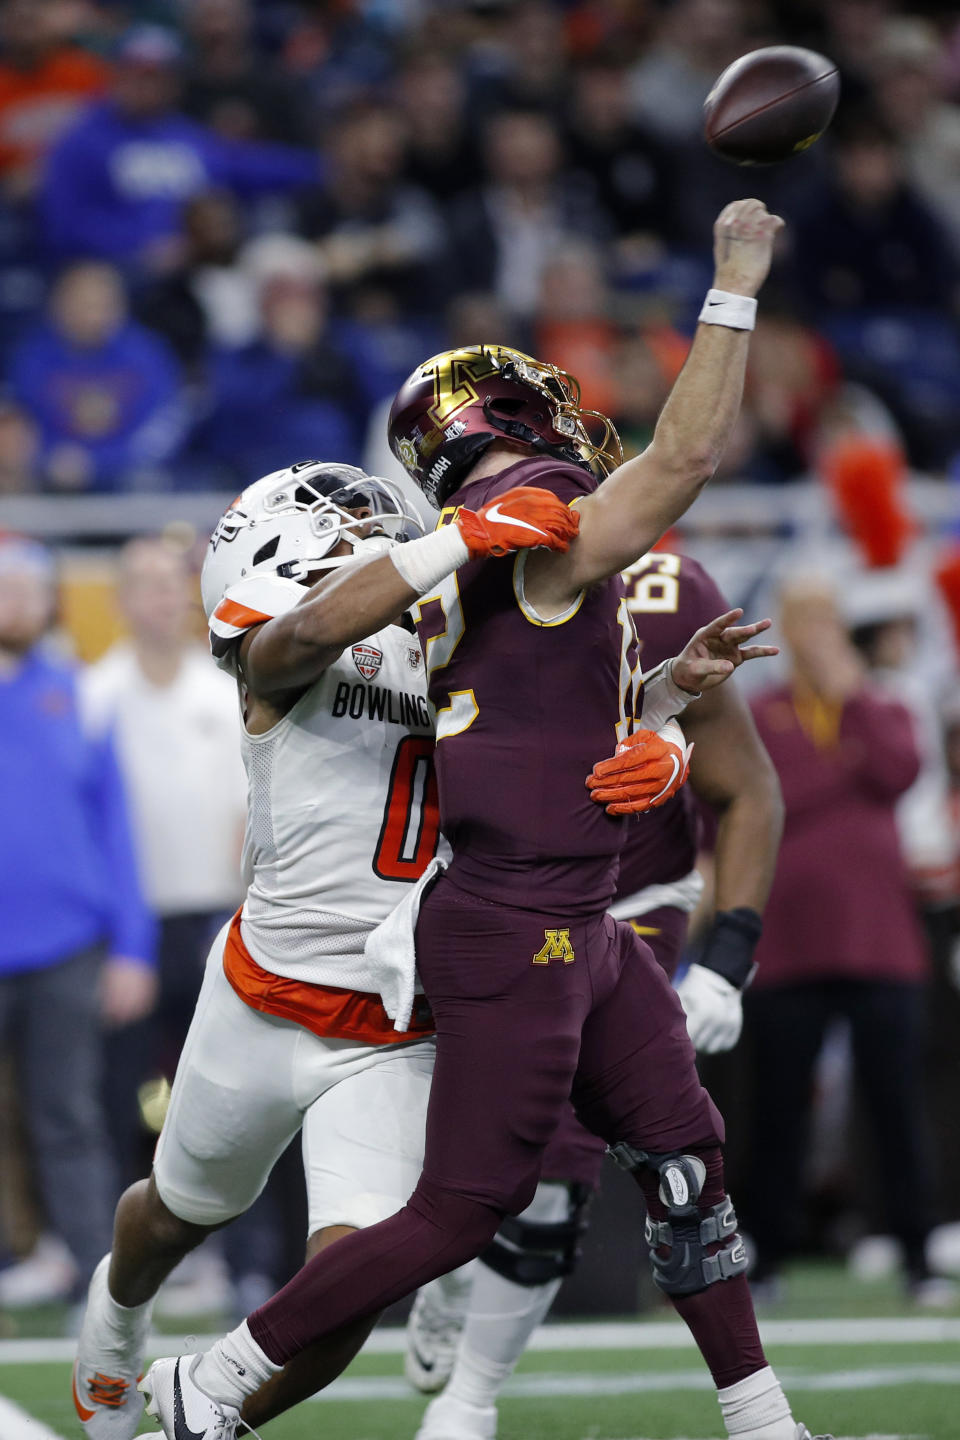 Bowling Green linebacker Cashius Howell (0), left, hits Minnesota quarterback Cole Kramer as he throws during the first half of the Quick Lane Bowl NCAA college football game, Tuesday, Dec. 26, 2023, in Detroit. The ball was intercepted by Bowling Green safety Darius Lorfils. (AP Photo/Al Goldis)